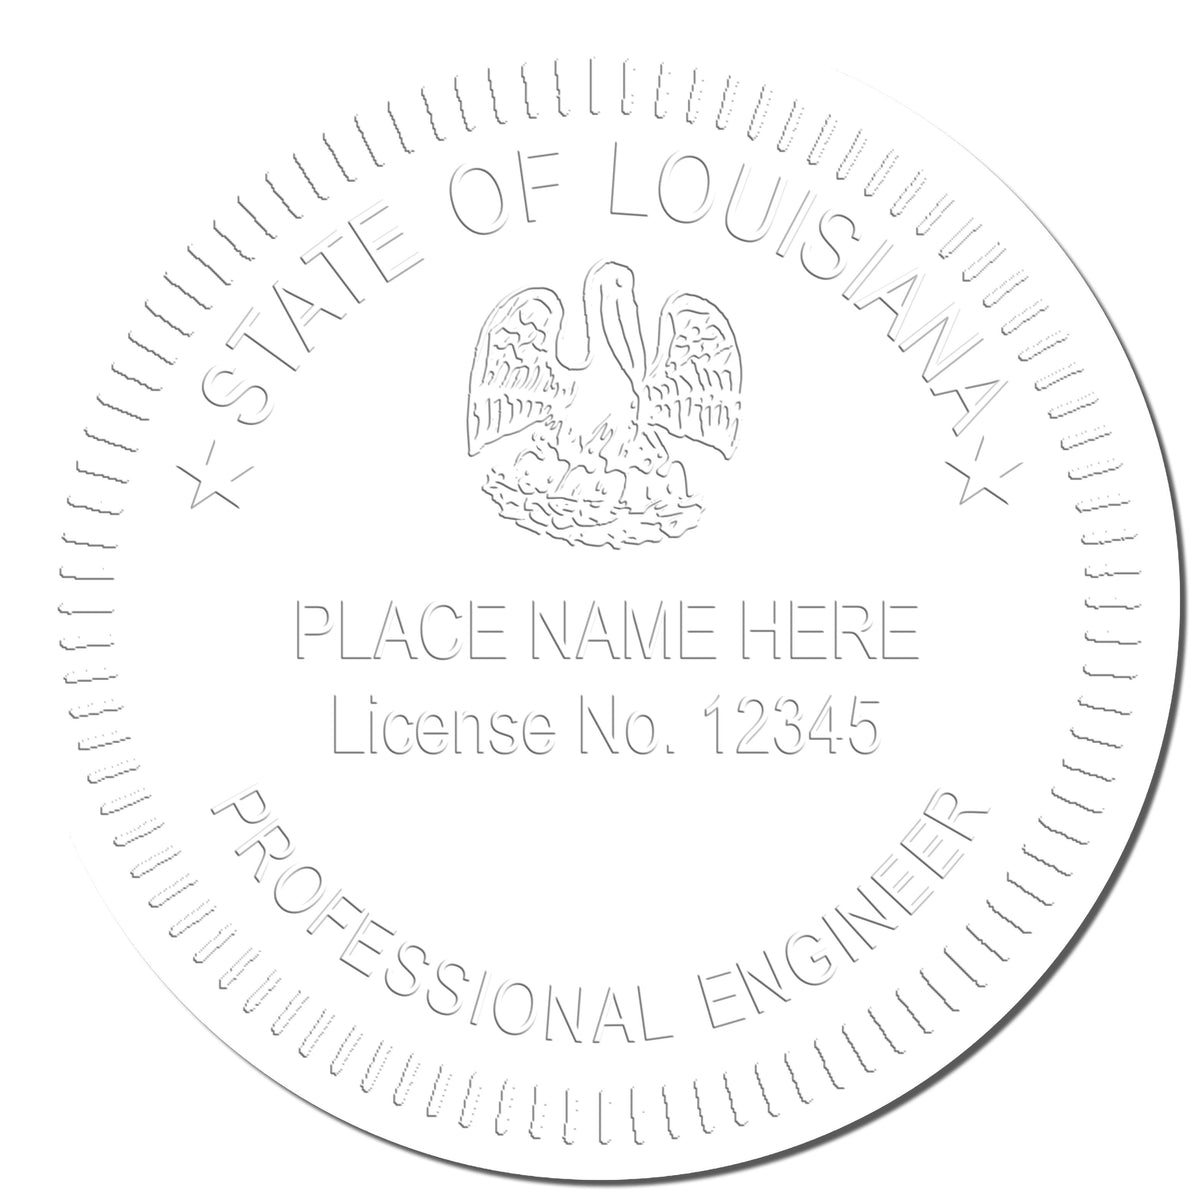 The Long Reach Louisiana PE Seal stamp impression comes to life with a crisp, detailed photo on paper - showcasing true professional quality.